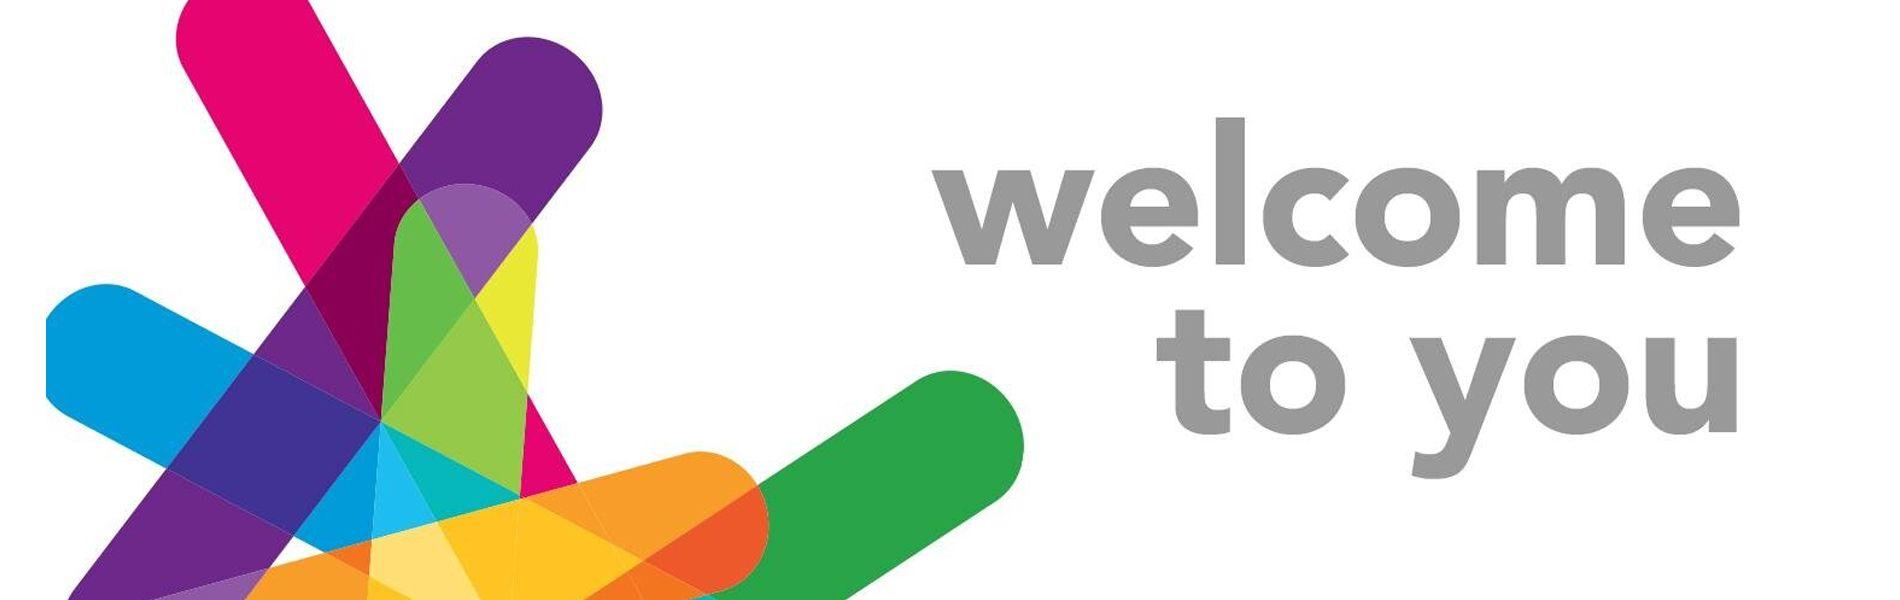 23 and Me Logo - 23andMe Launches New Customer Experience - Reports Include Carrier ...